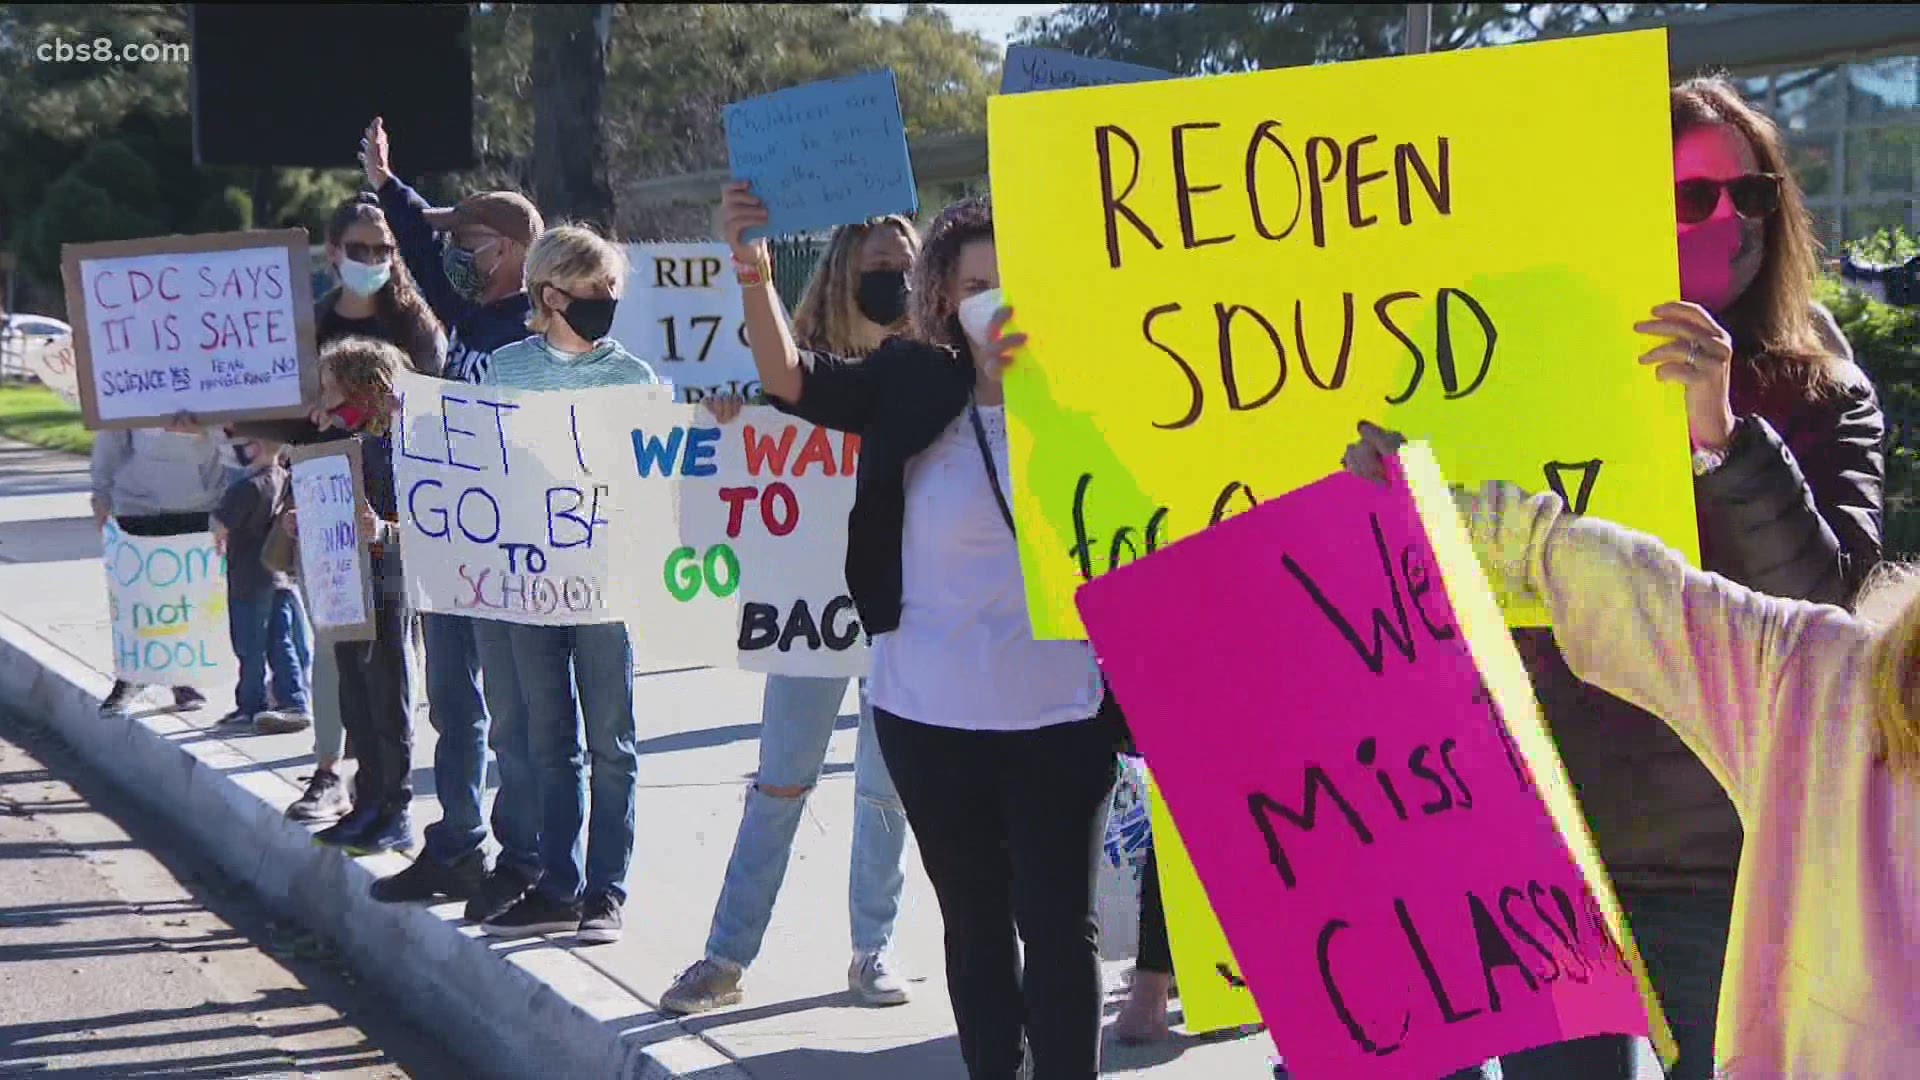 The group 'Reopen SDUSD' organized rallies outside several schools Thursday, pushing for a return to the classroom.